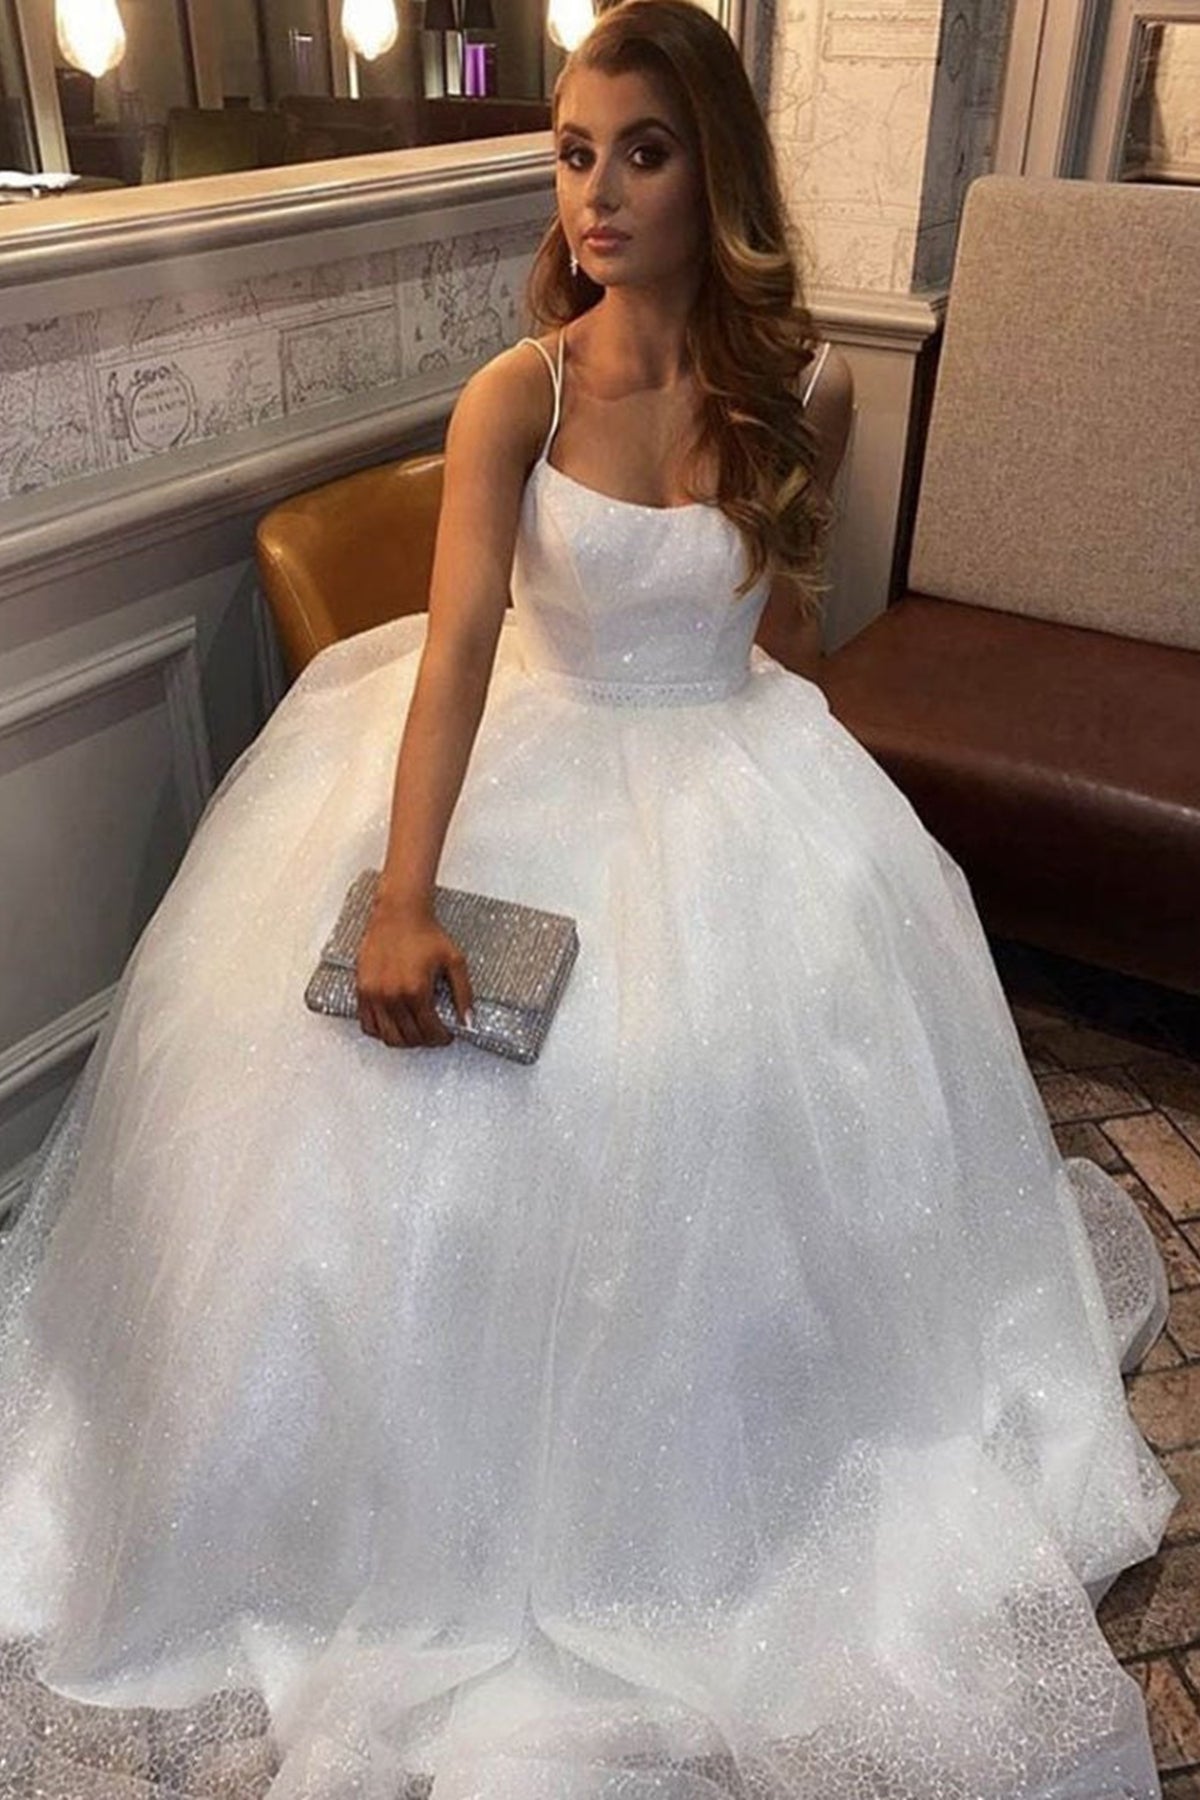 Shiny White Tulle Long Prom Dresses with Thin Straps, Long White Formal Evening Dresses